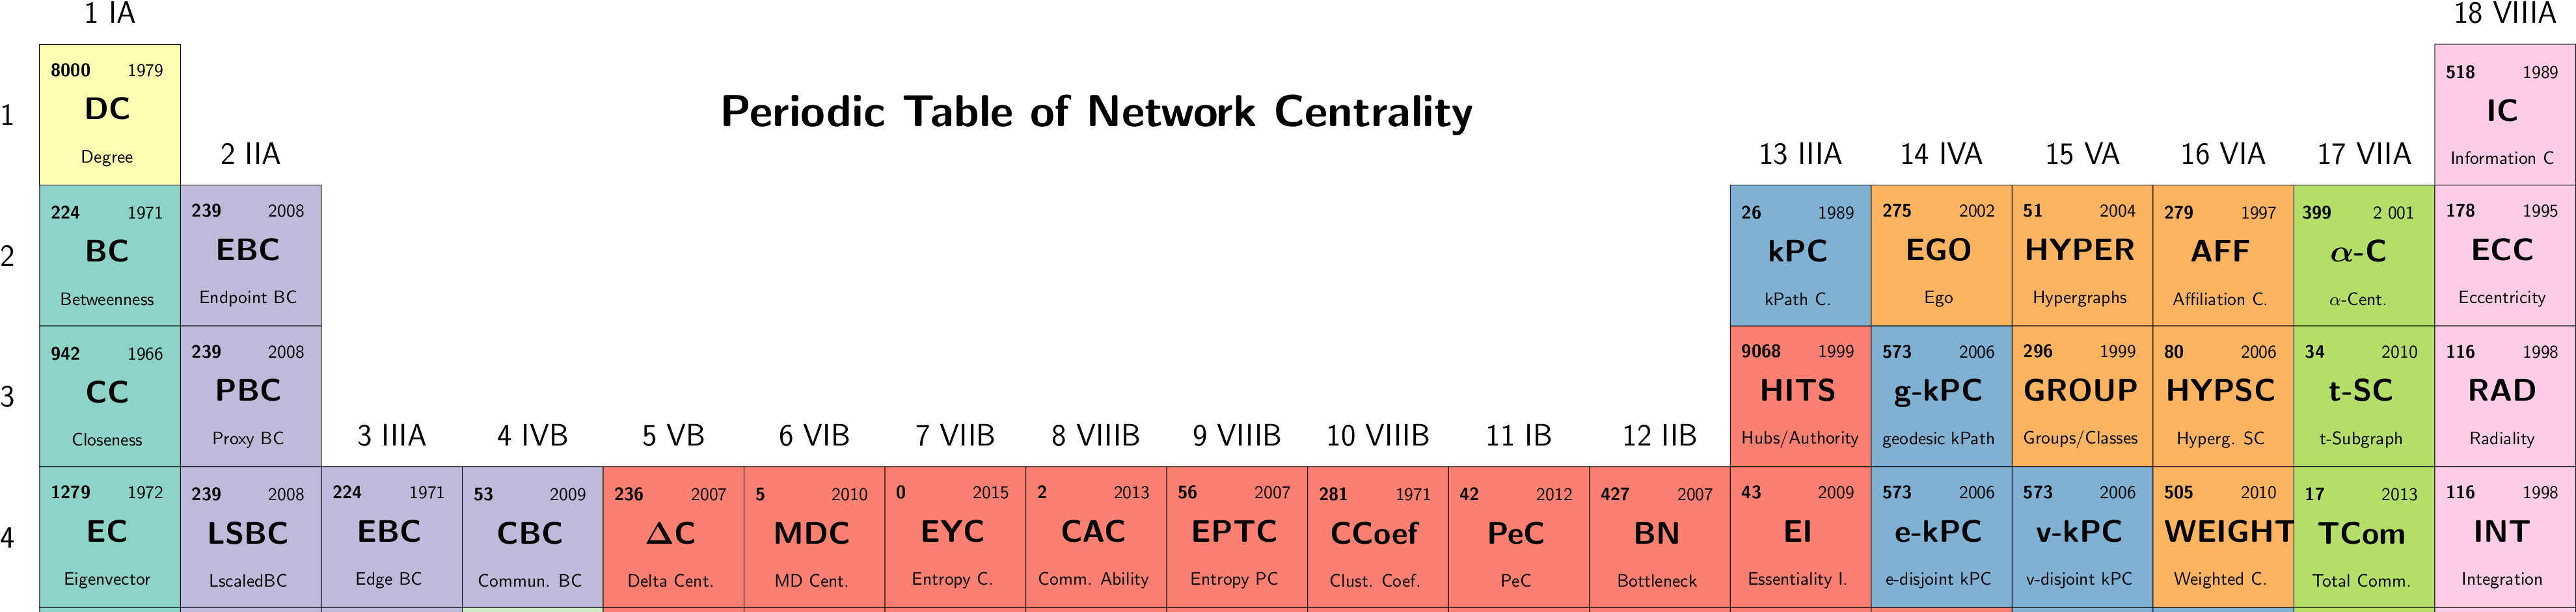 Periodic Tableof Network Centrality